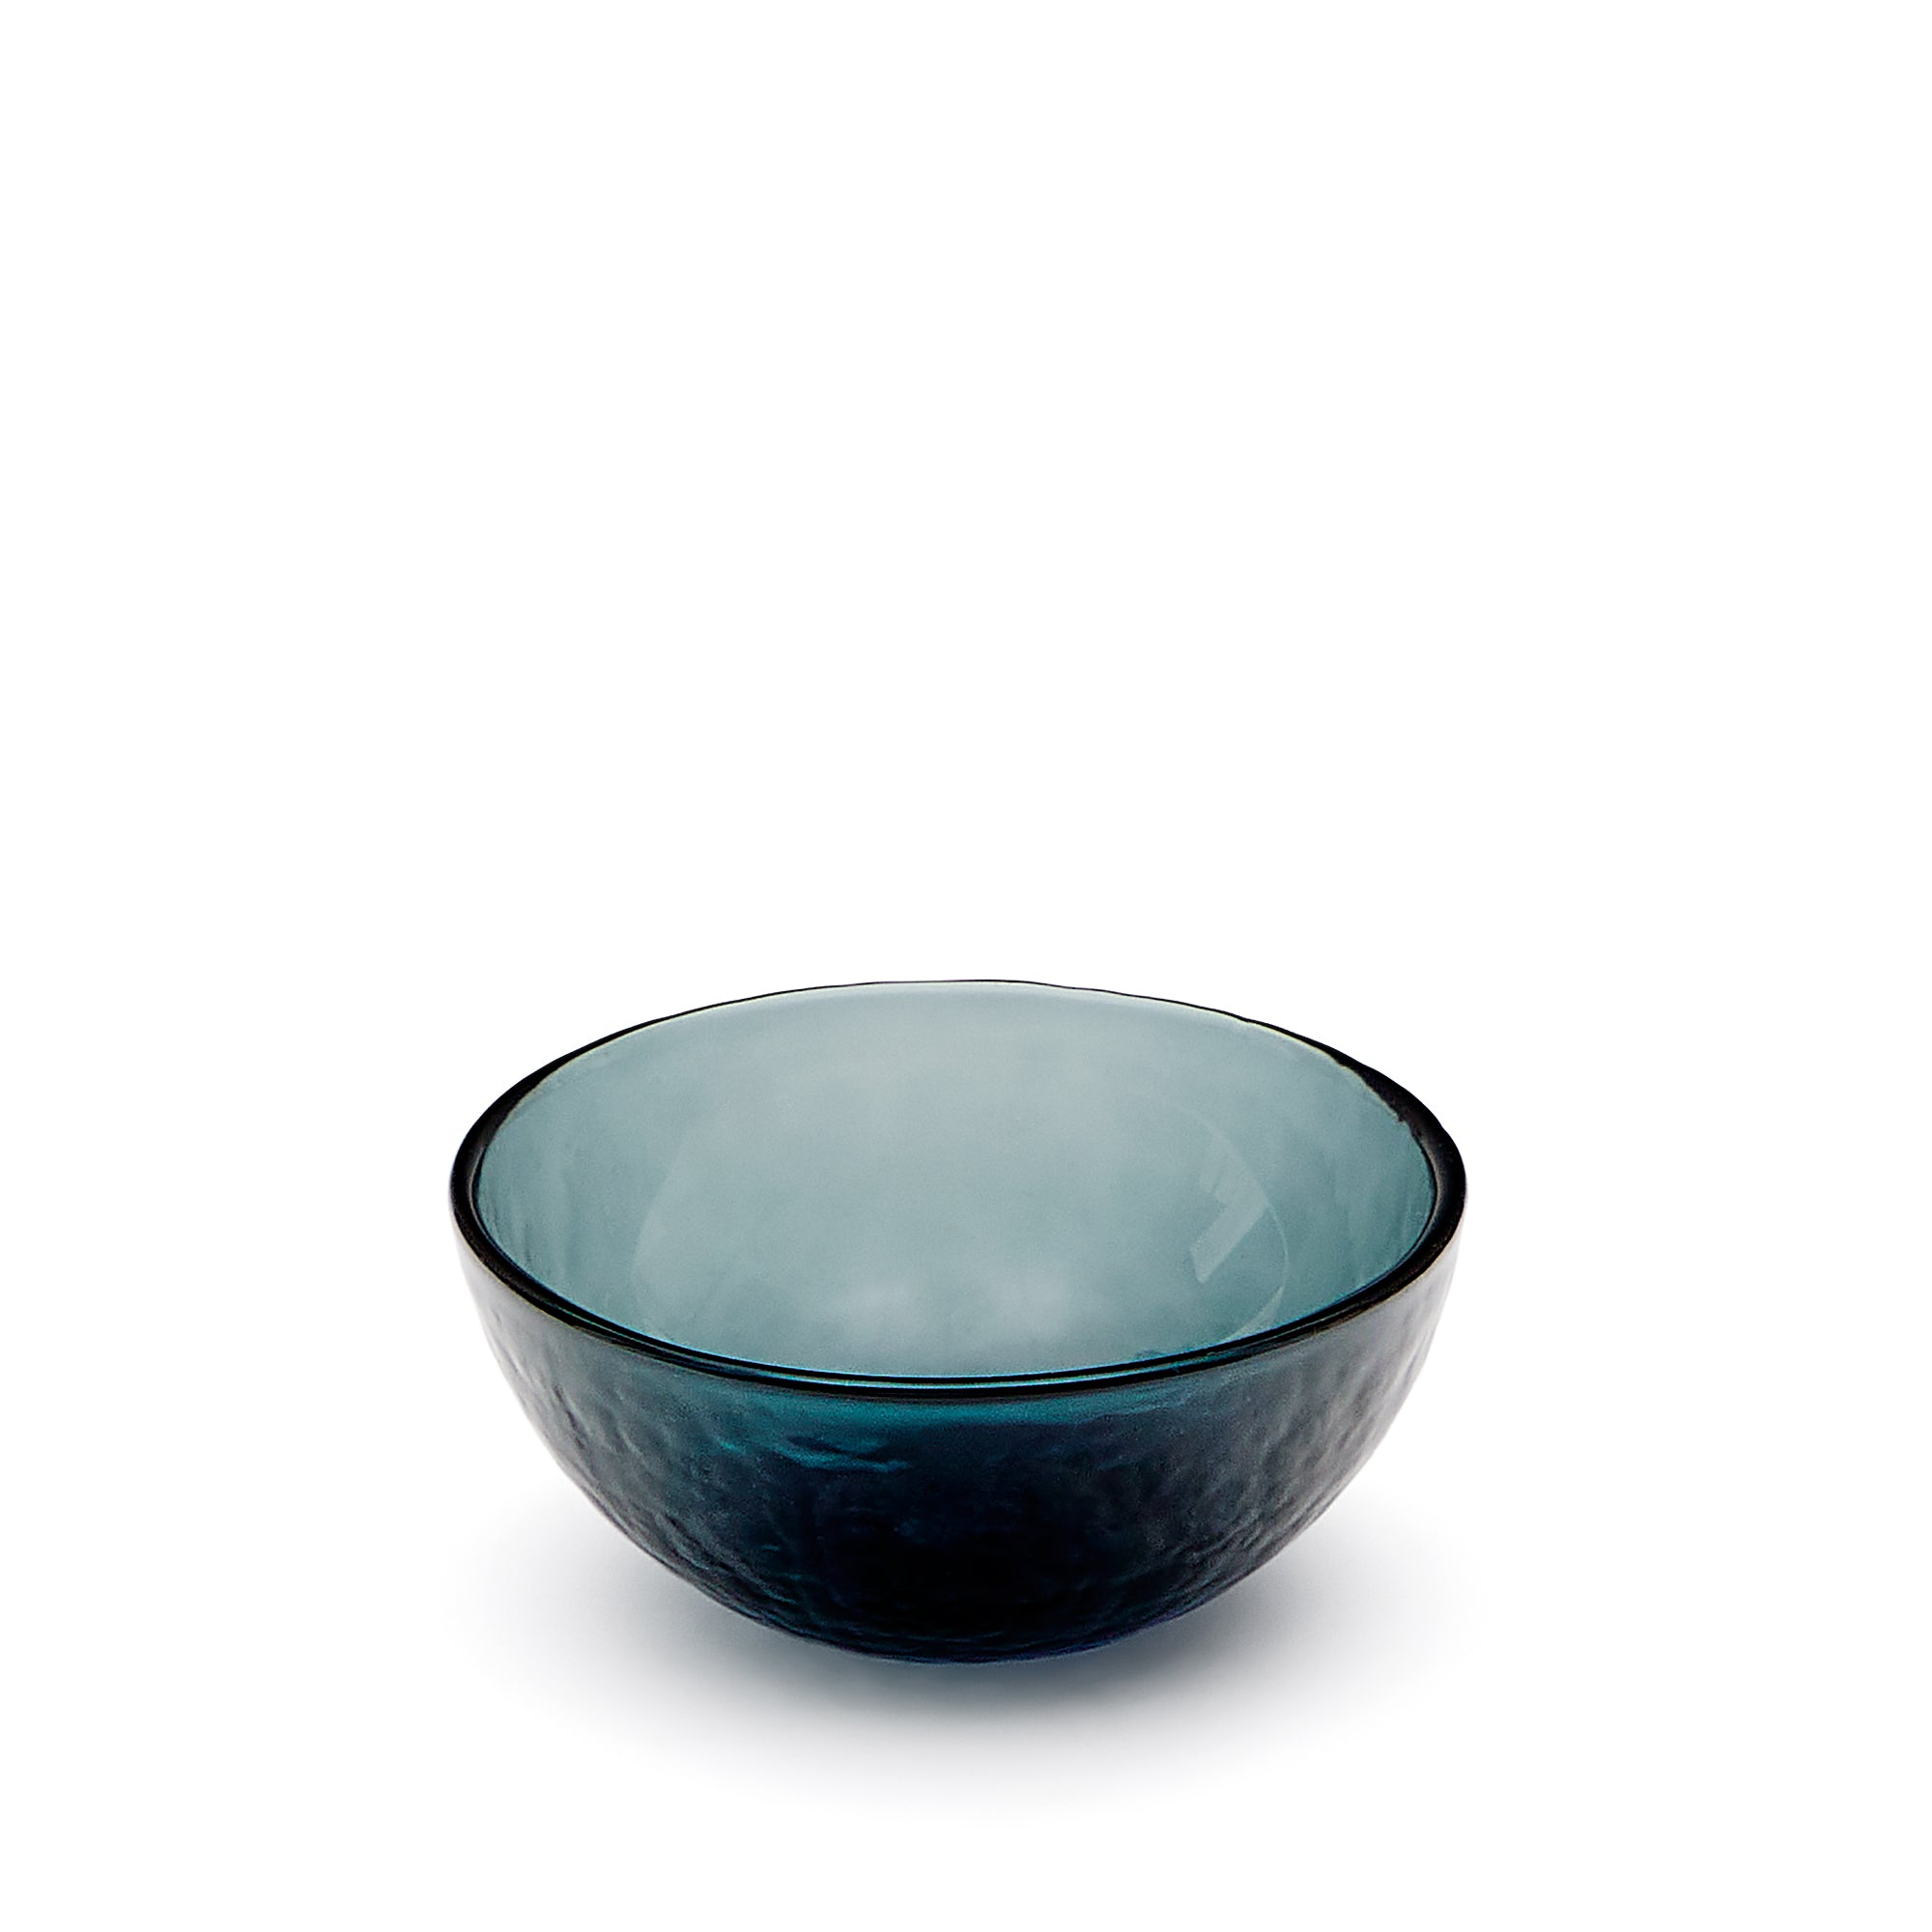 Sunera bowl made of recycled gray glass